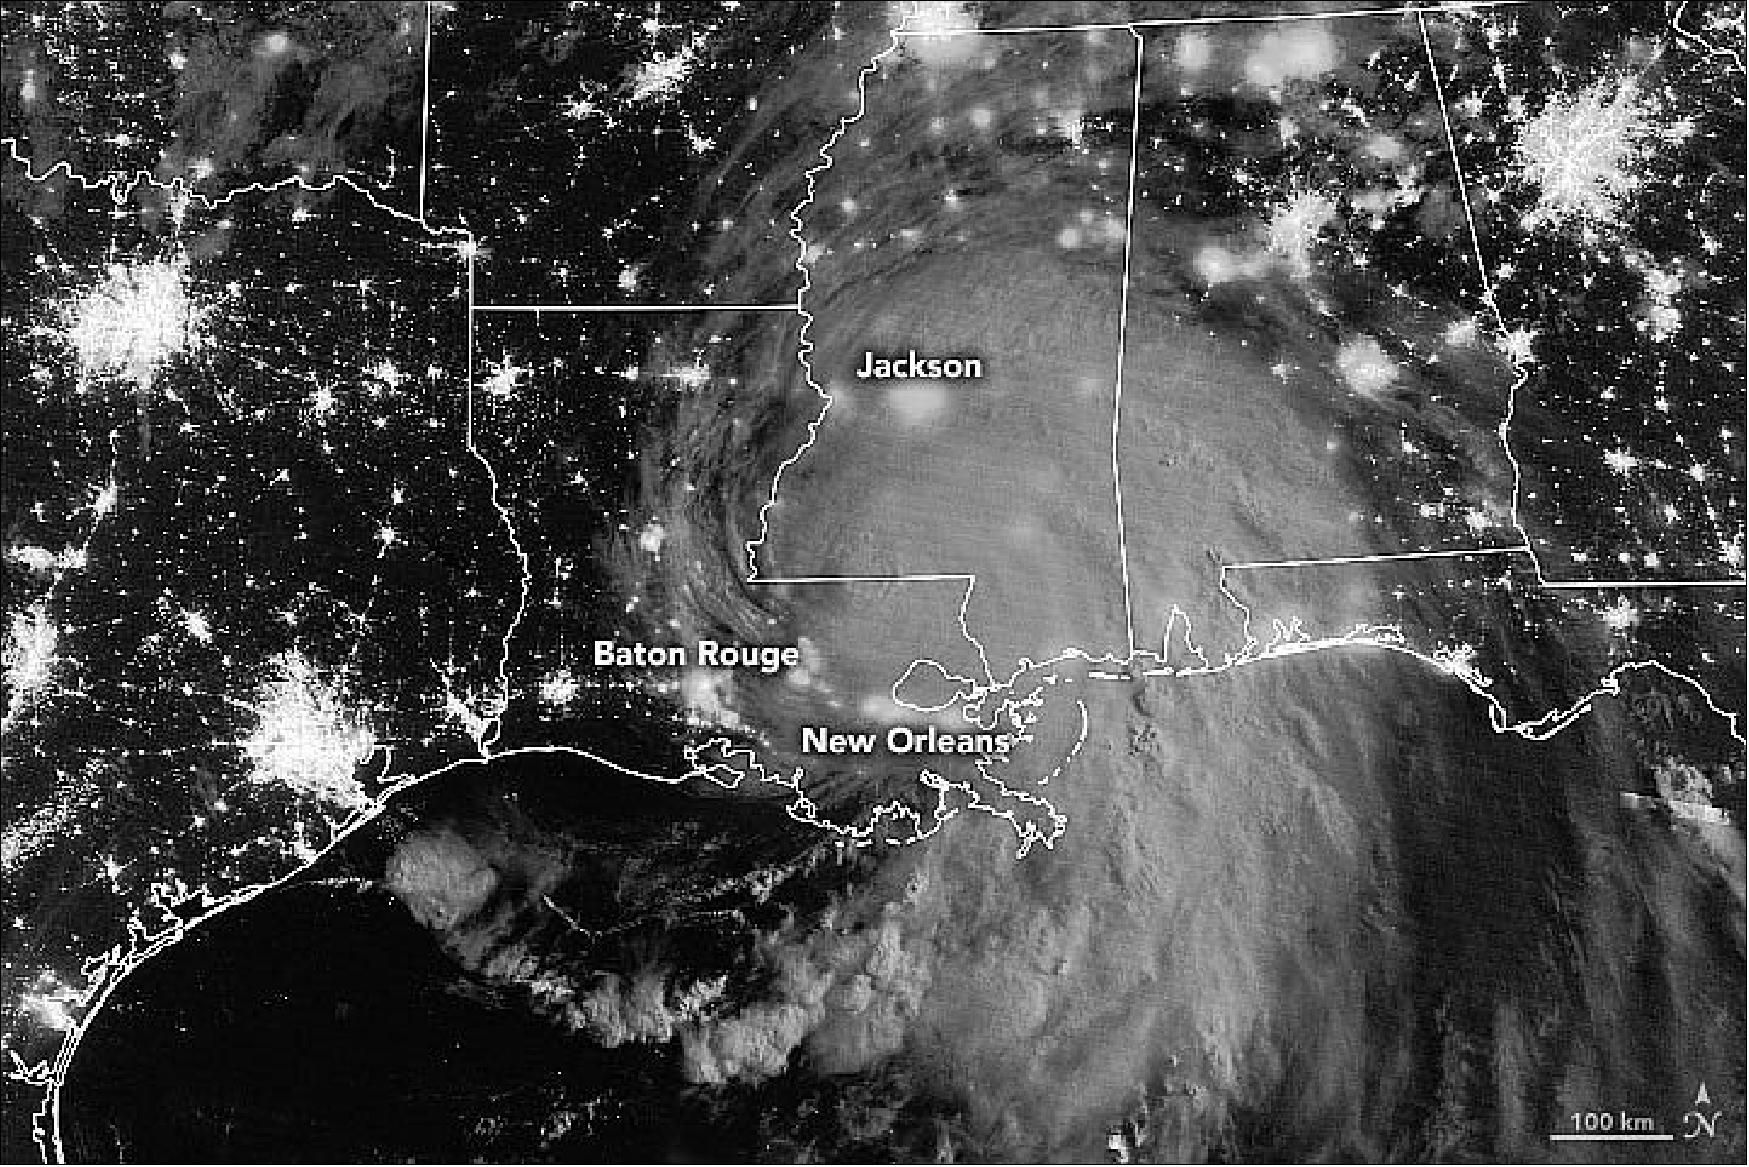 Figure 35: Preliminary reports suggest it is the fifth-strongest storm ever to make landfall in the continental U.S. In the last 24 hours before landfall, the storm’s central pressure dropped from 985 millibars to 929, and winds intensified rapidly from 85 to 150 miles per hour. According to the National Hurricane Center, a storm has undergone “rapid intensification” when winds increase by at least 35 miles per hour within 24 hours. The intensification was partly fueled by the hot summer surface waters of the Gulf of Mexico, which were about 30–31º Celsius (86–88º Fahrenheit), [image credit: NASA Earth Observatory images and video by Joshua Stevens, using VIIRS day-night band data from the Suomi National Polar-orbiting Partnership, GEOS-5 data from the Global Modeling and Assimilation Office at NASA GSFC, and power outage data courtesy of PowerOutage.us. Story by Michael Carlowicz]